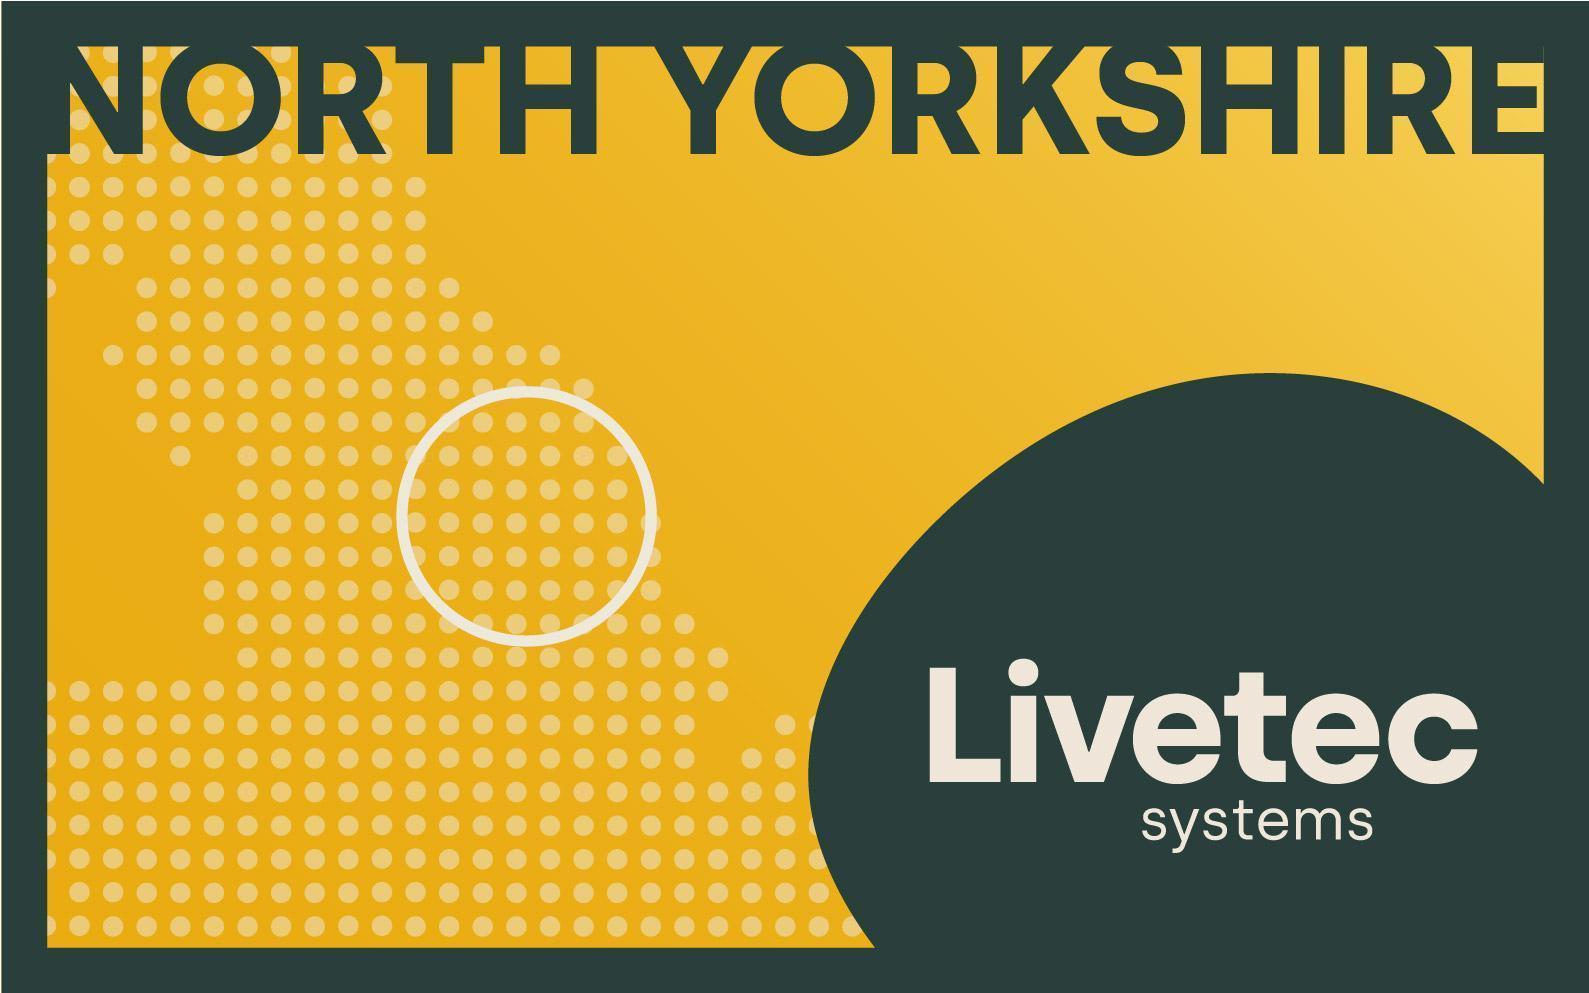 Livetec respond to AI outbreak in North Yorkshire